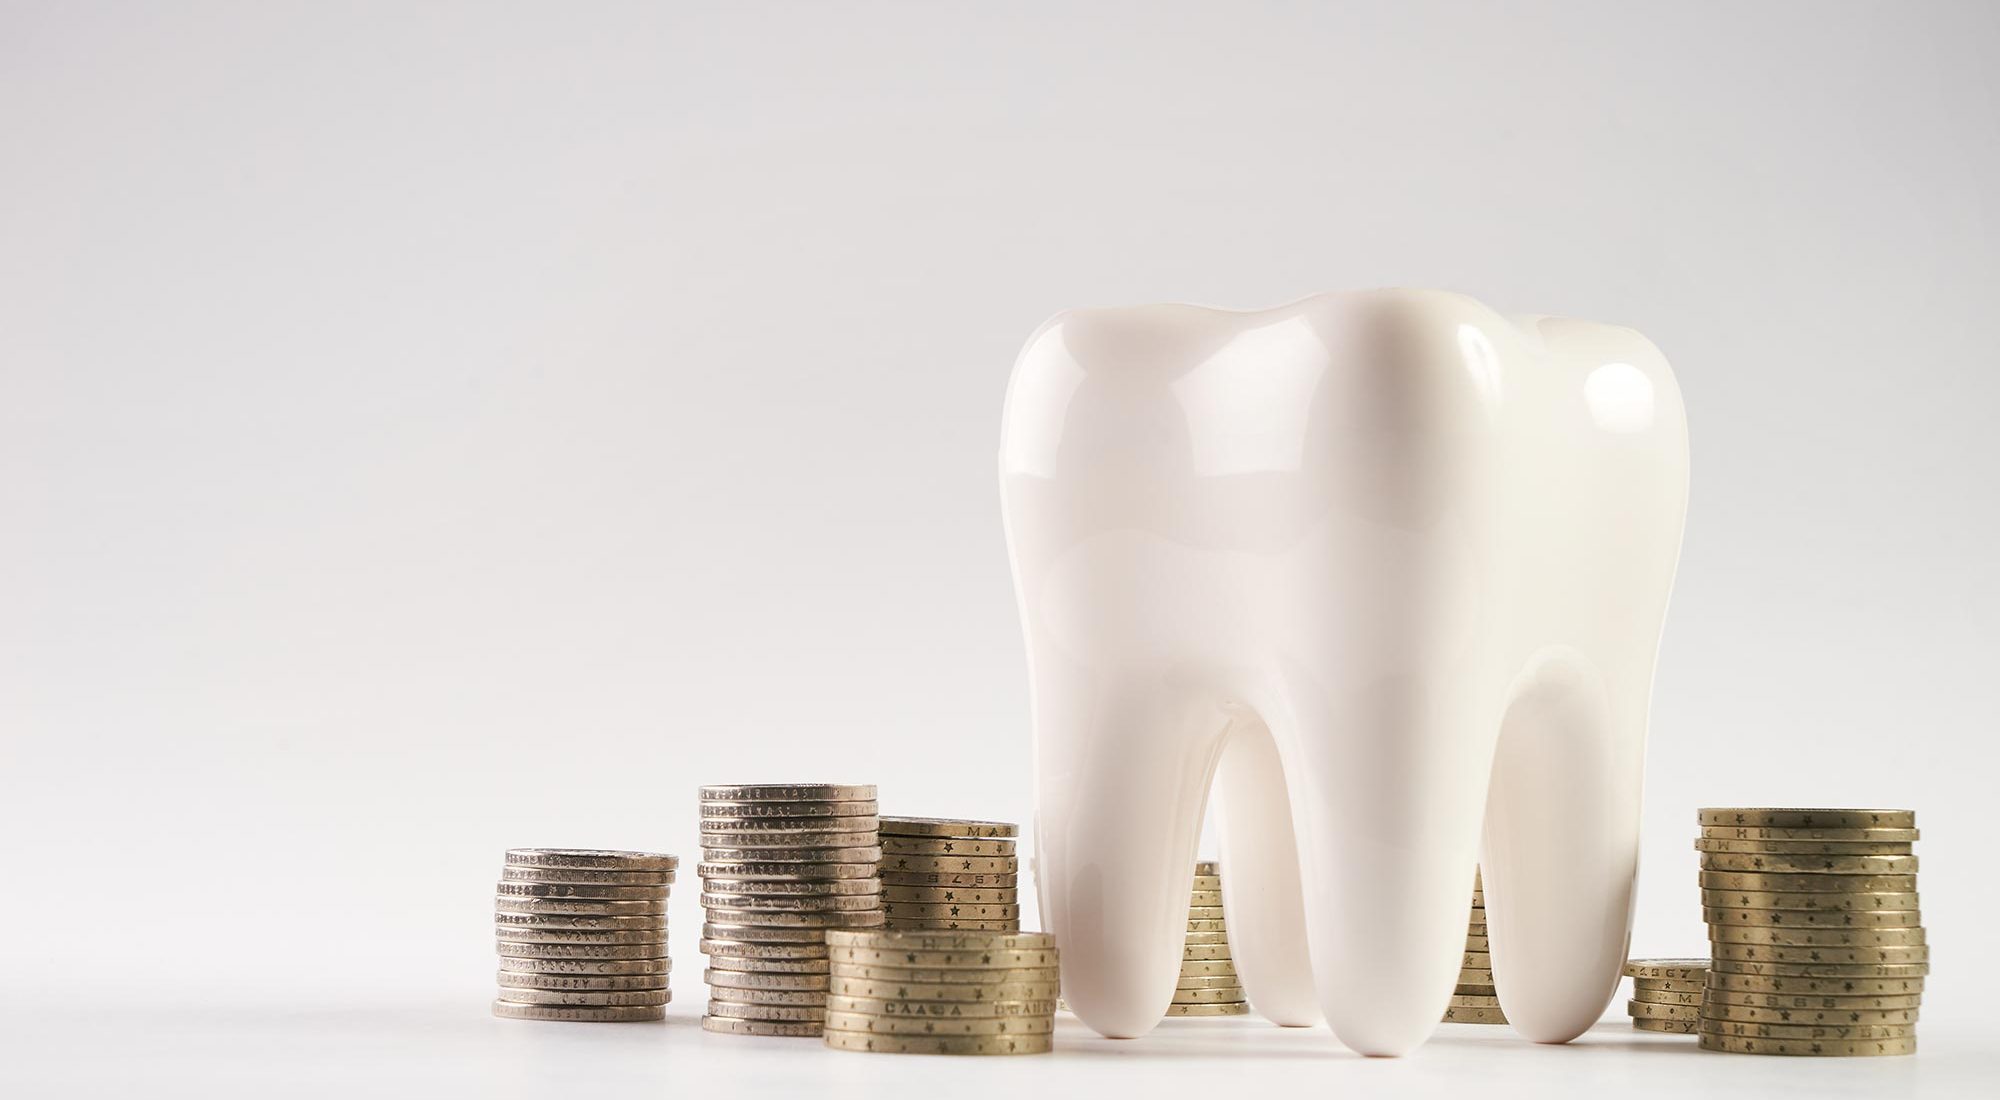 Dental professionals are being called upon to pay their annual retention fee (ARF) by the General Dental Council